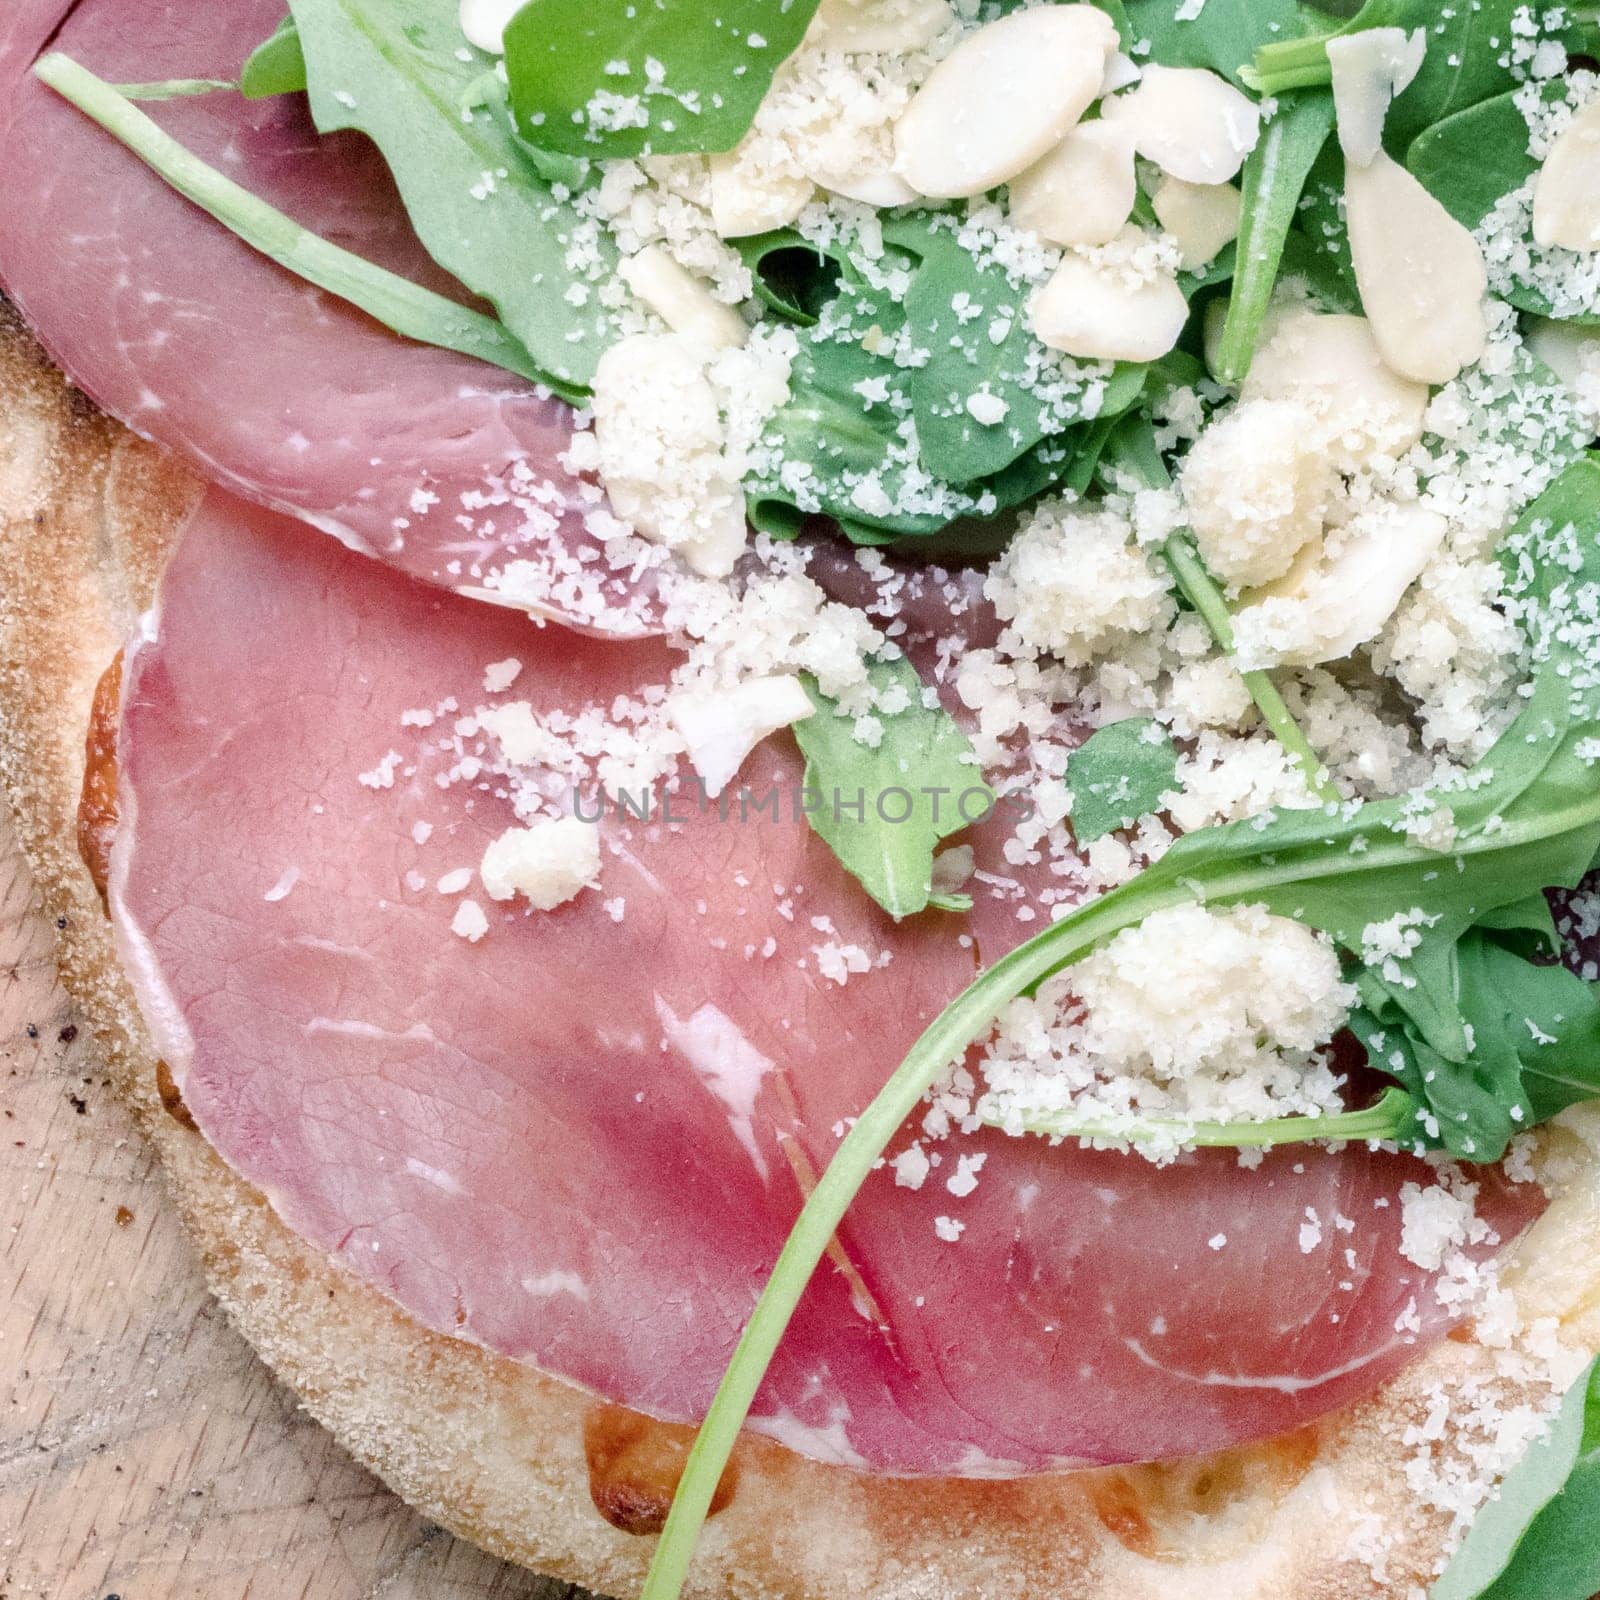 Pizza topping ideas. Gourmet pizza with mozzarella, rocket, bresaola, parmesan and almonds. Top view.